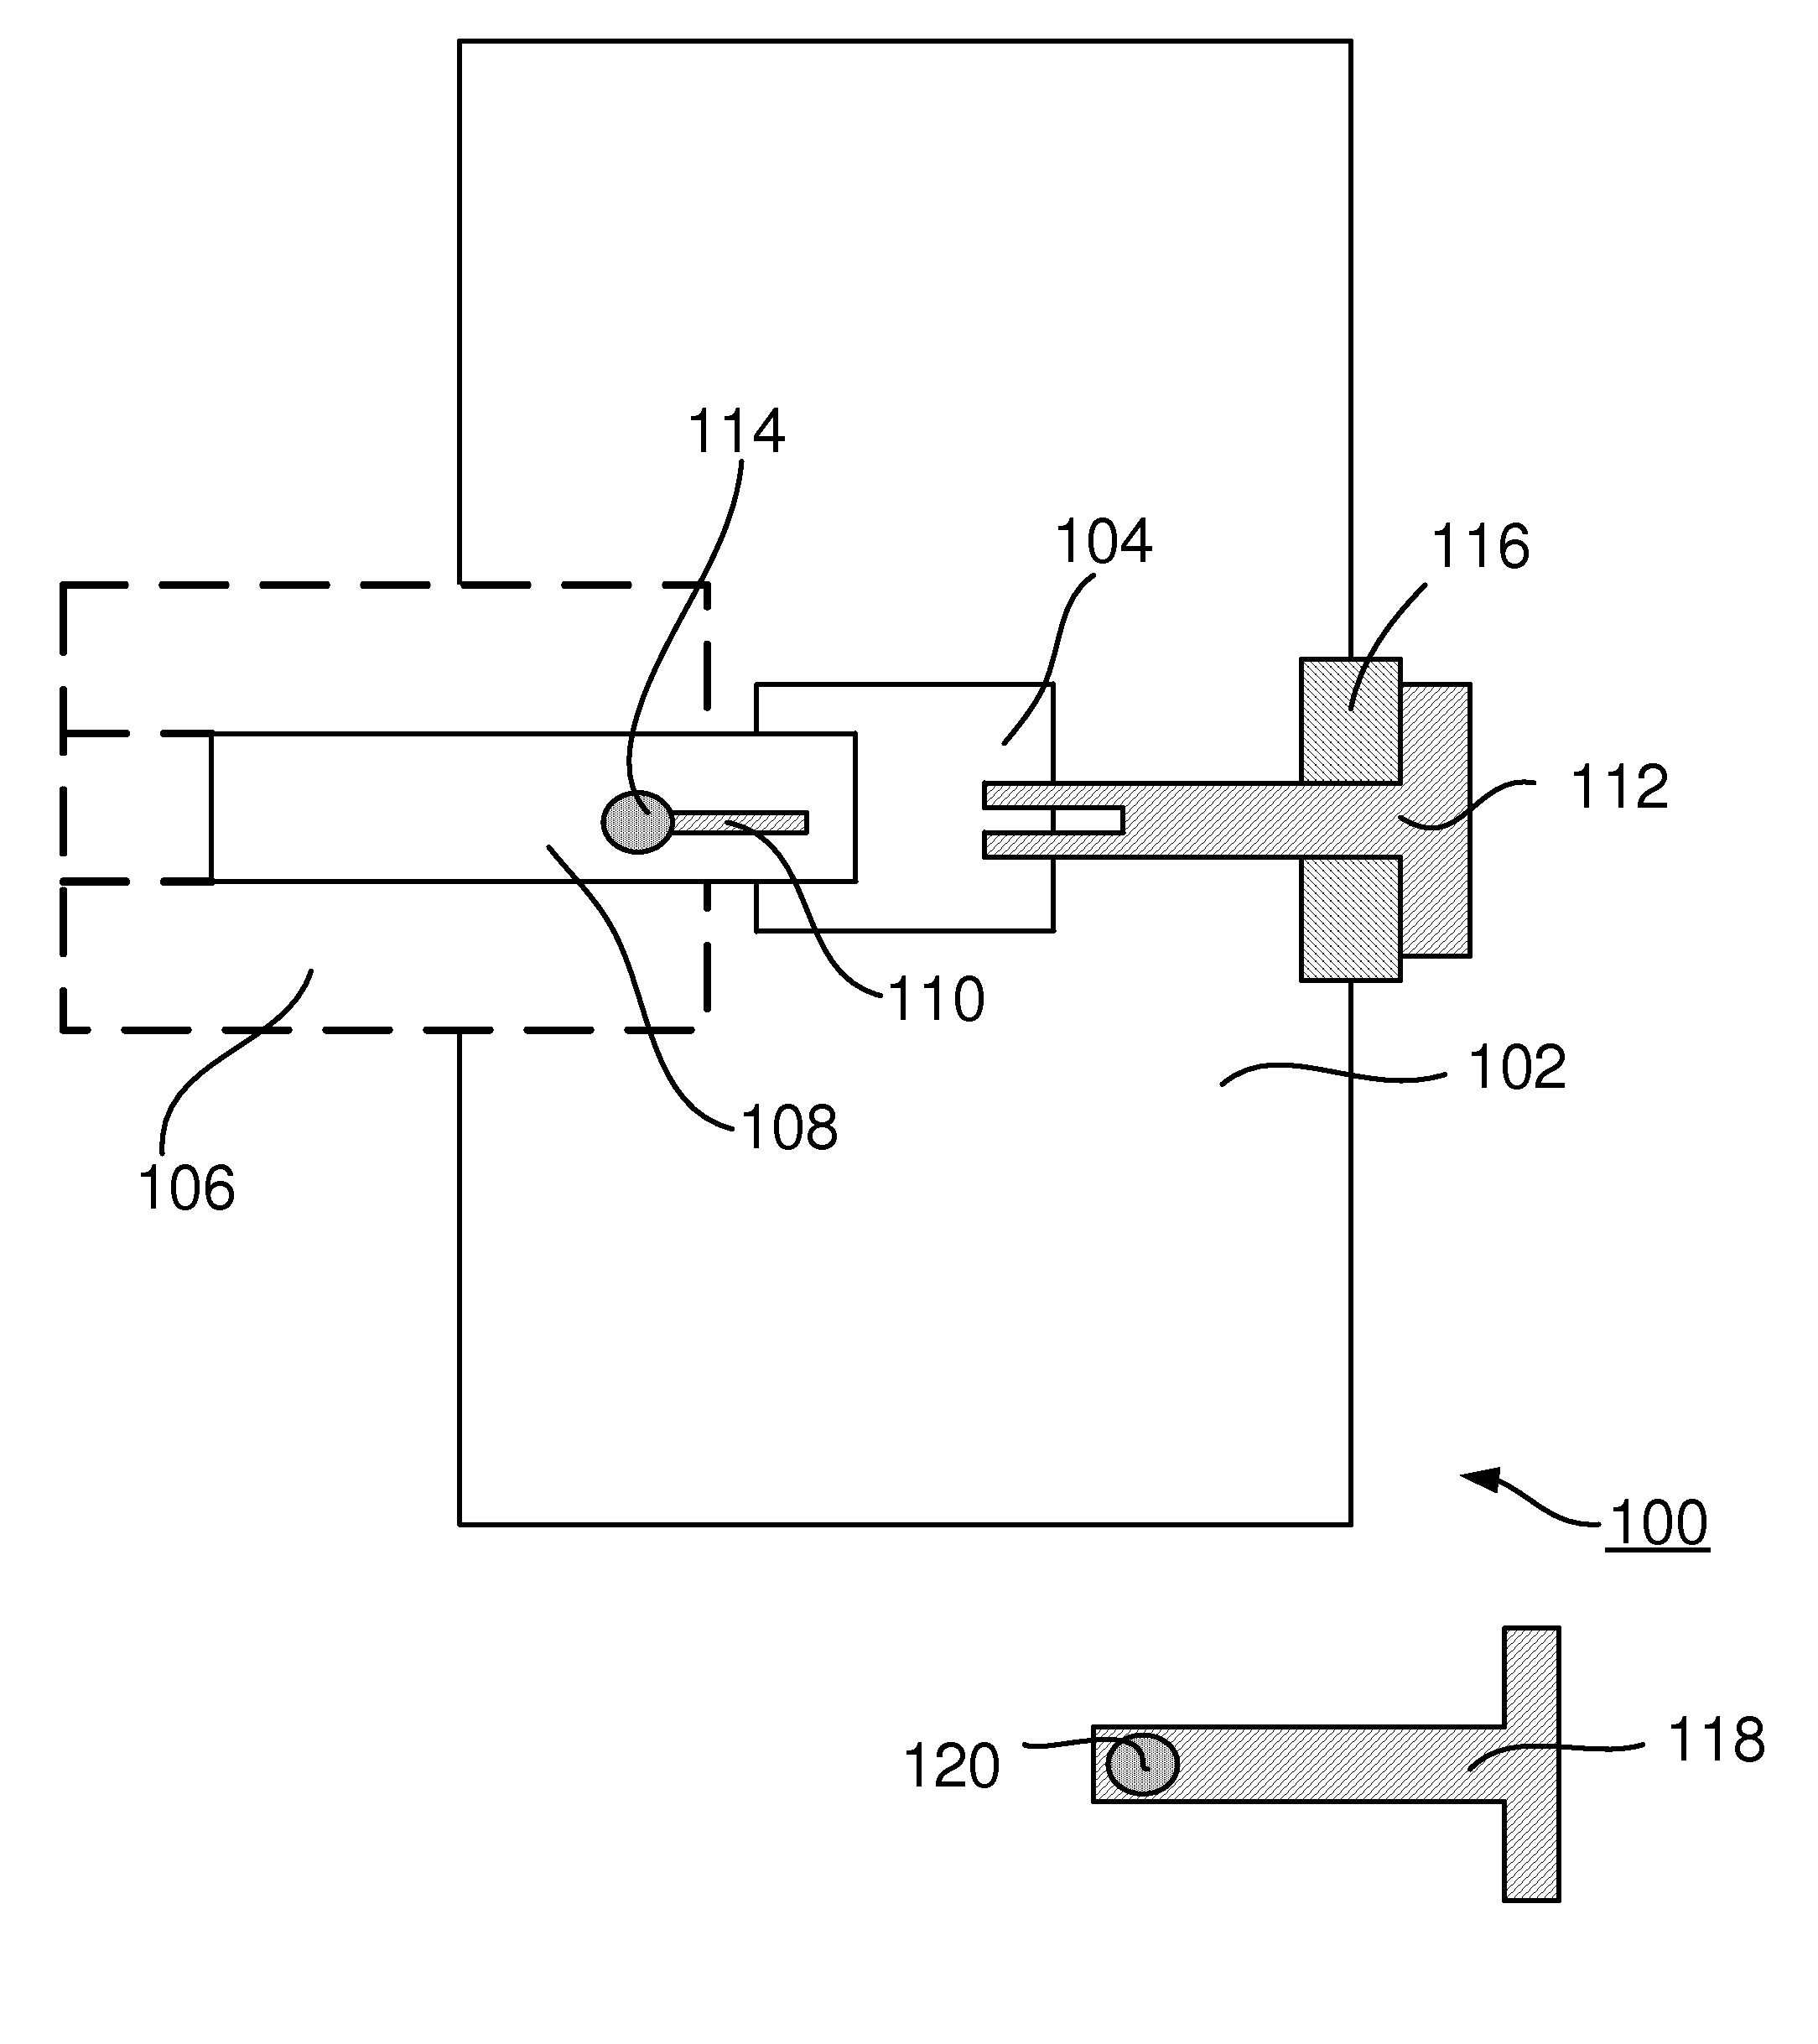 Charged-particle optical system with dual loading options